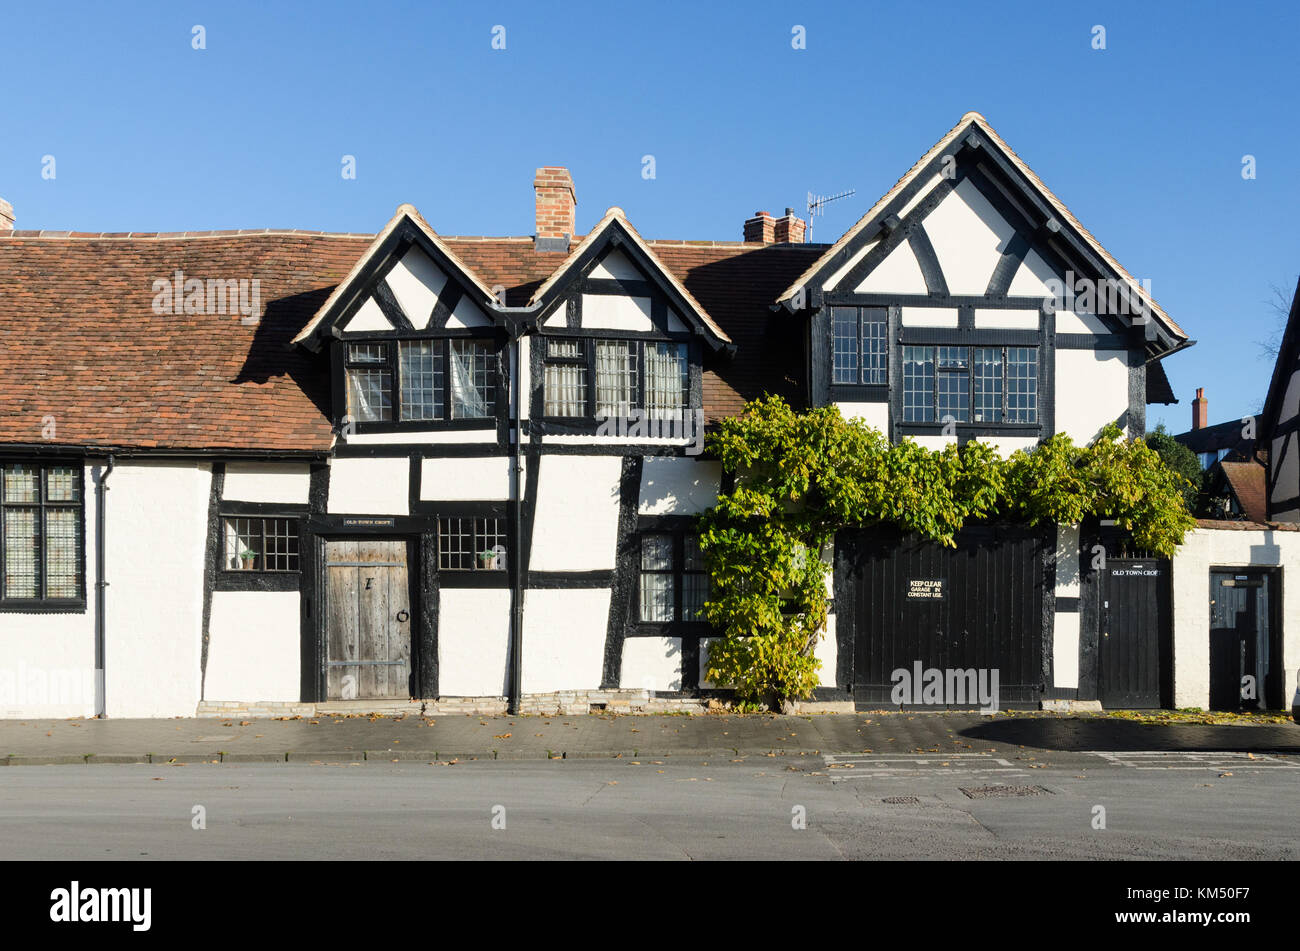 Crooked black and white timber-framed house in Stratford-upon-Avon, Warwickshire, UK Stock Photo